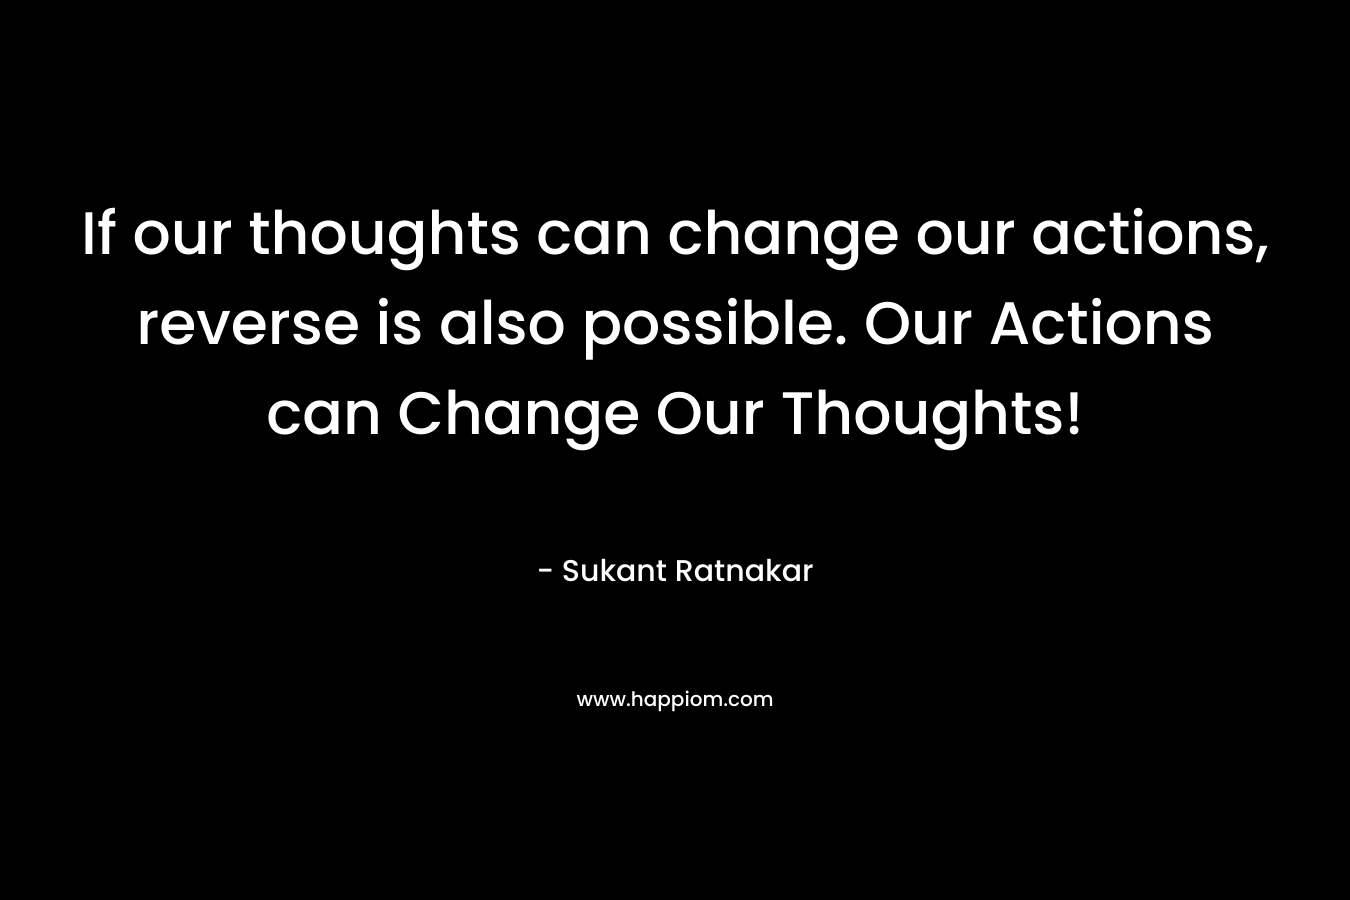 If our thoughts can change our actions, reverse is also possible. Our Actions can Change Our Thoughts!